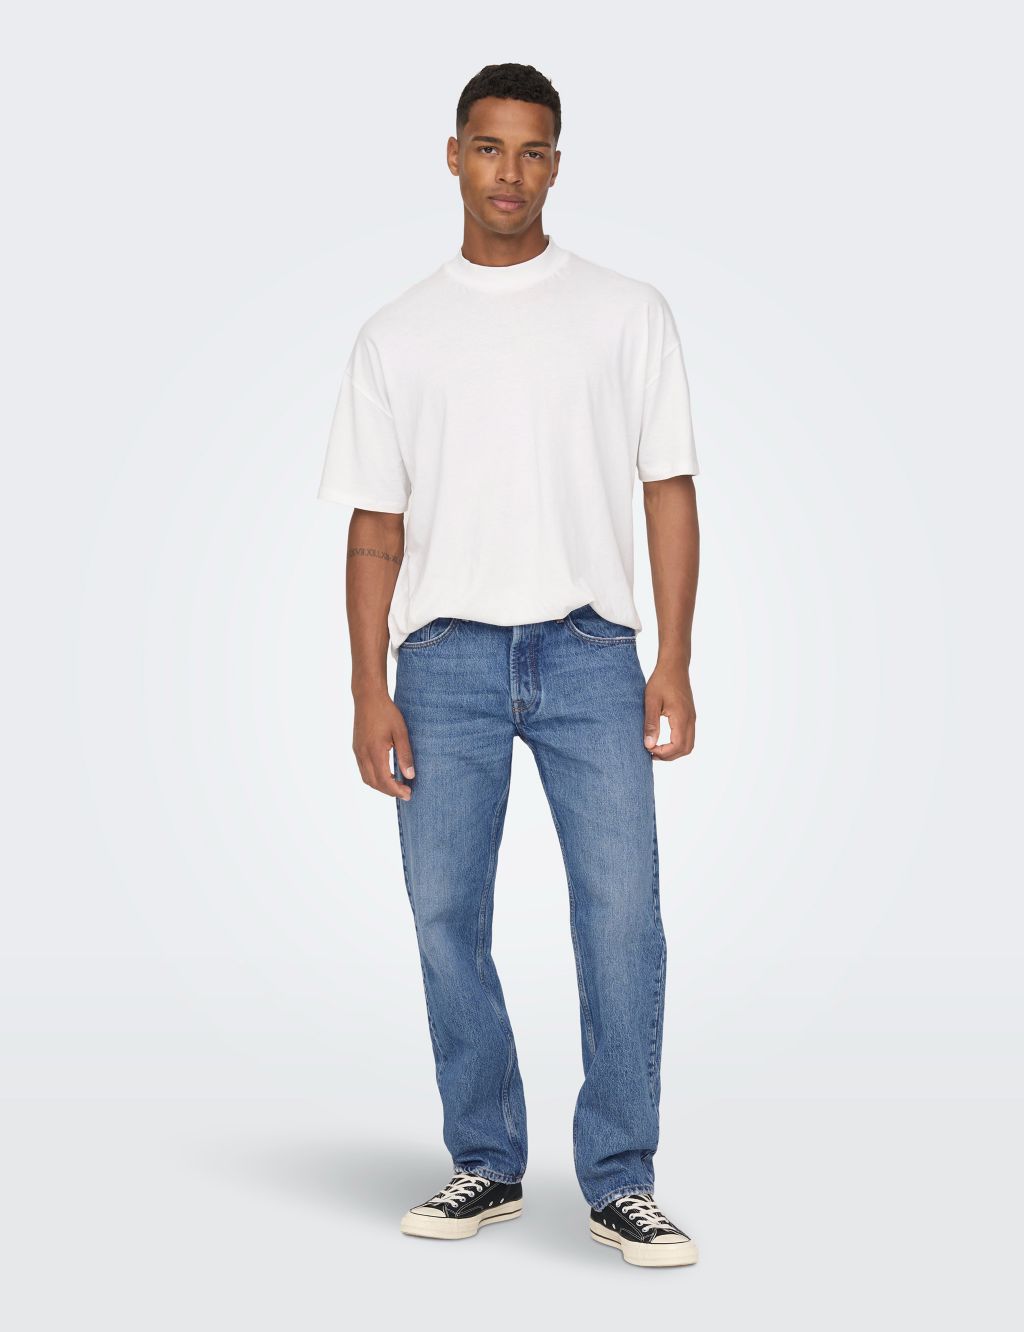 Straight Fit Pure Cotton 5 Pocket Jeans image 3